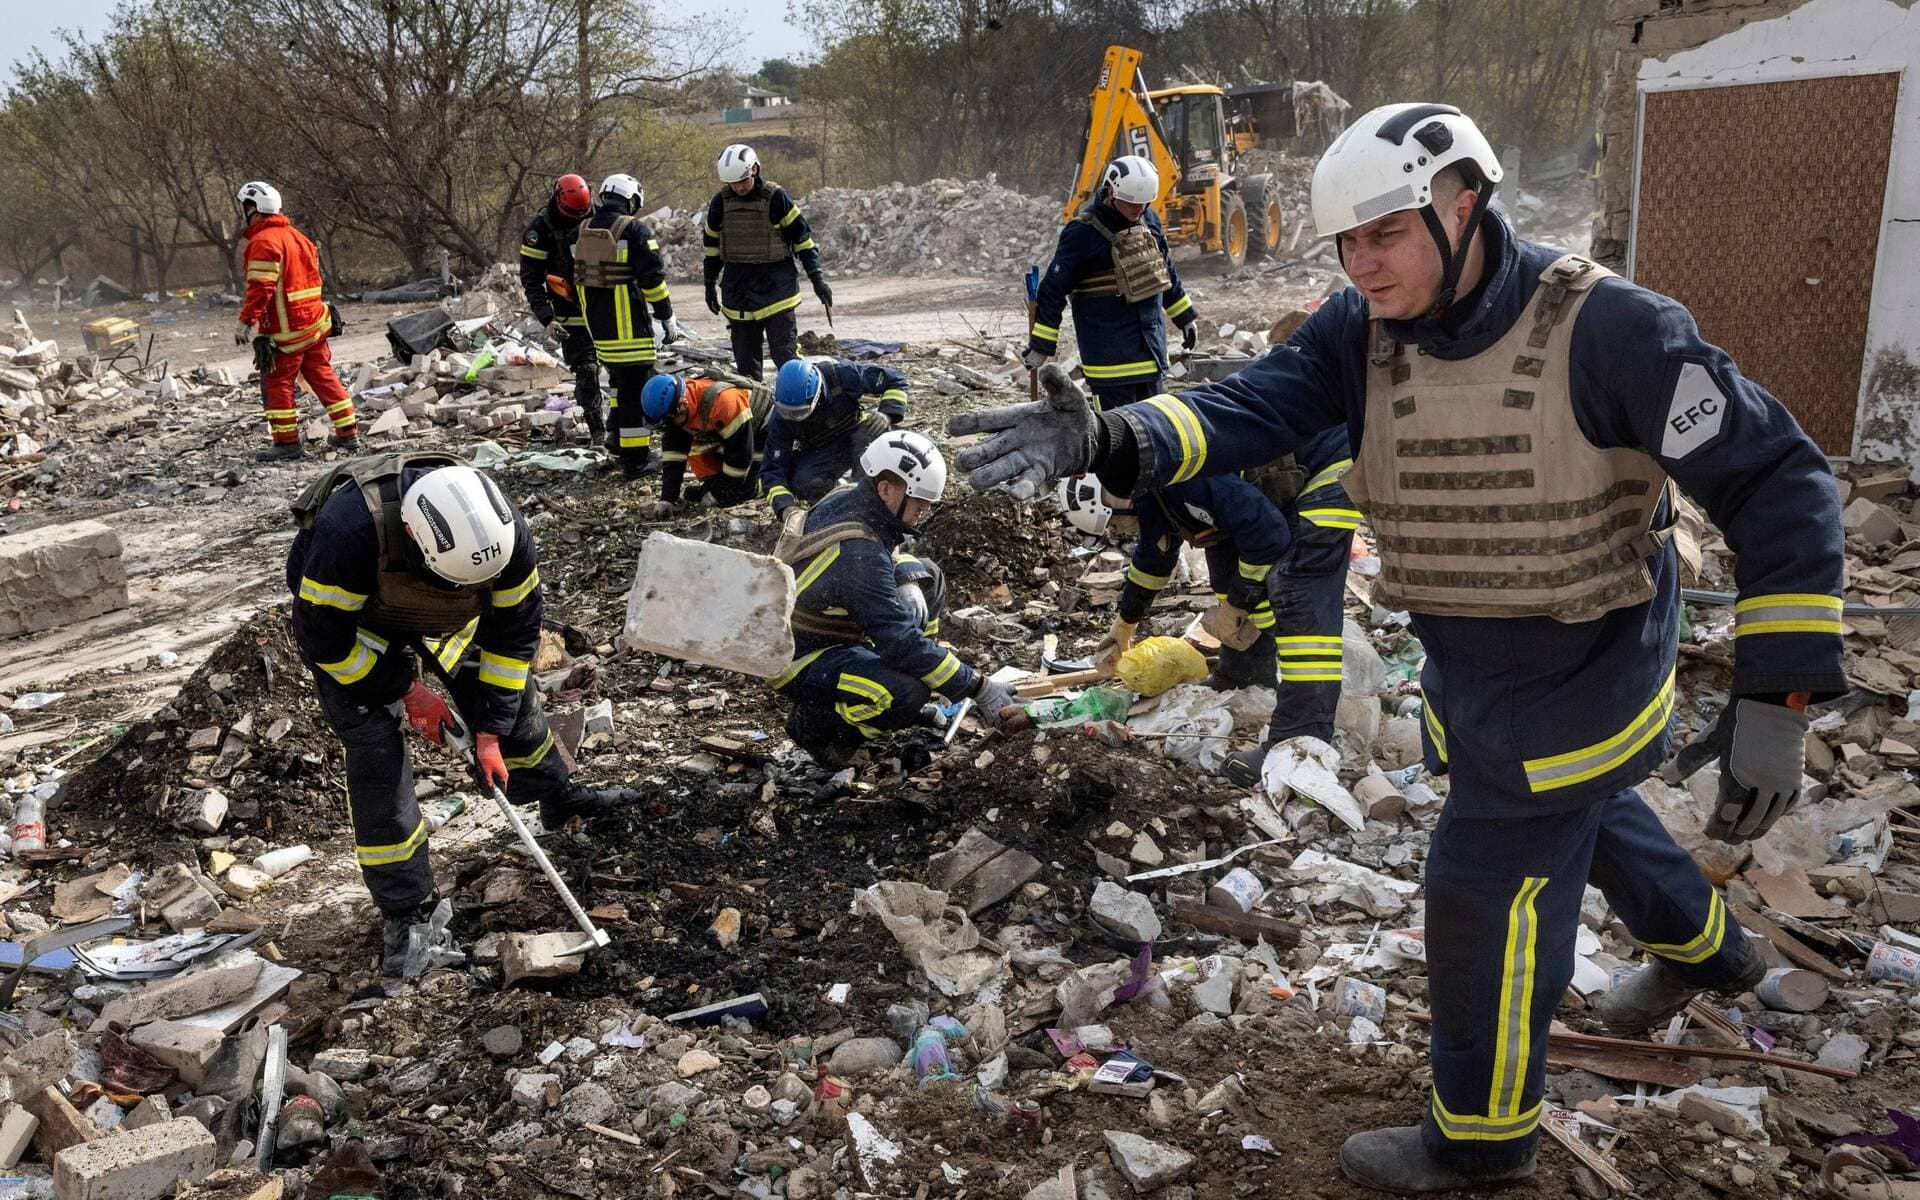 Rescue workers dig through the rubble at the site of a missile attack in the village of Hroza, near Kharkiv